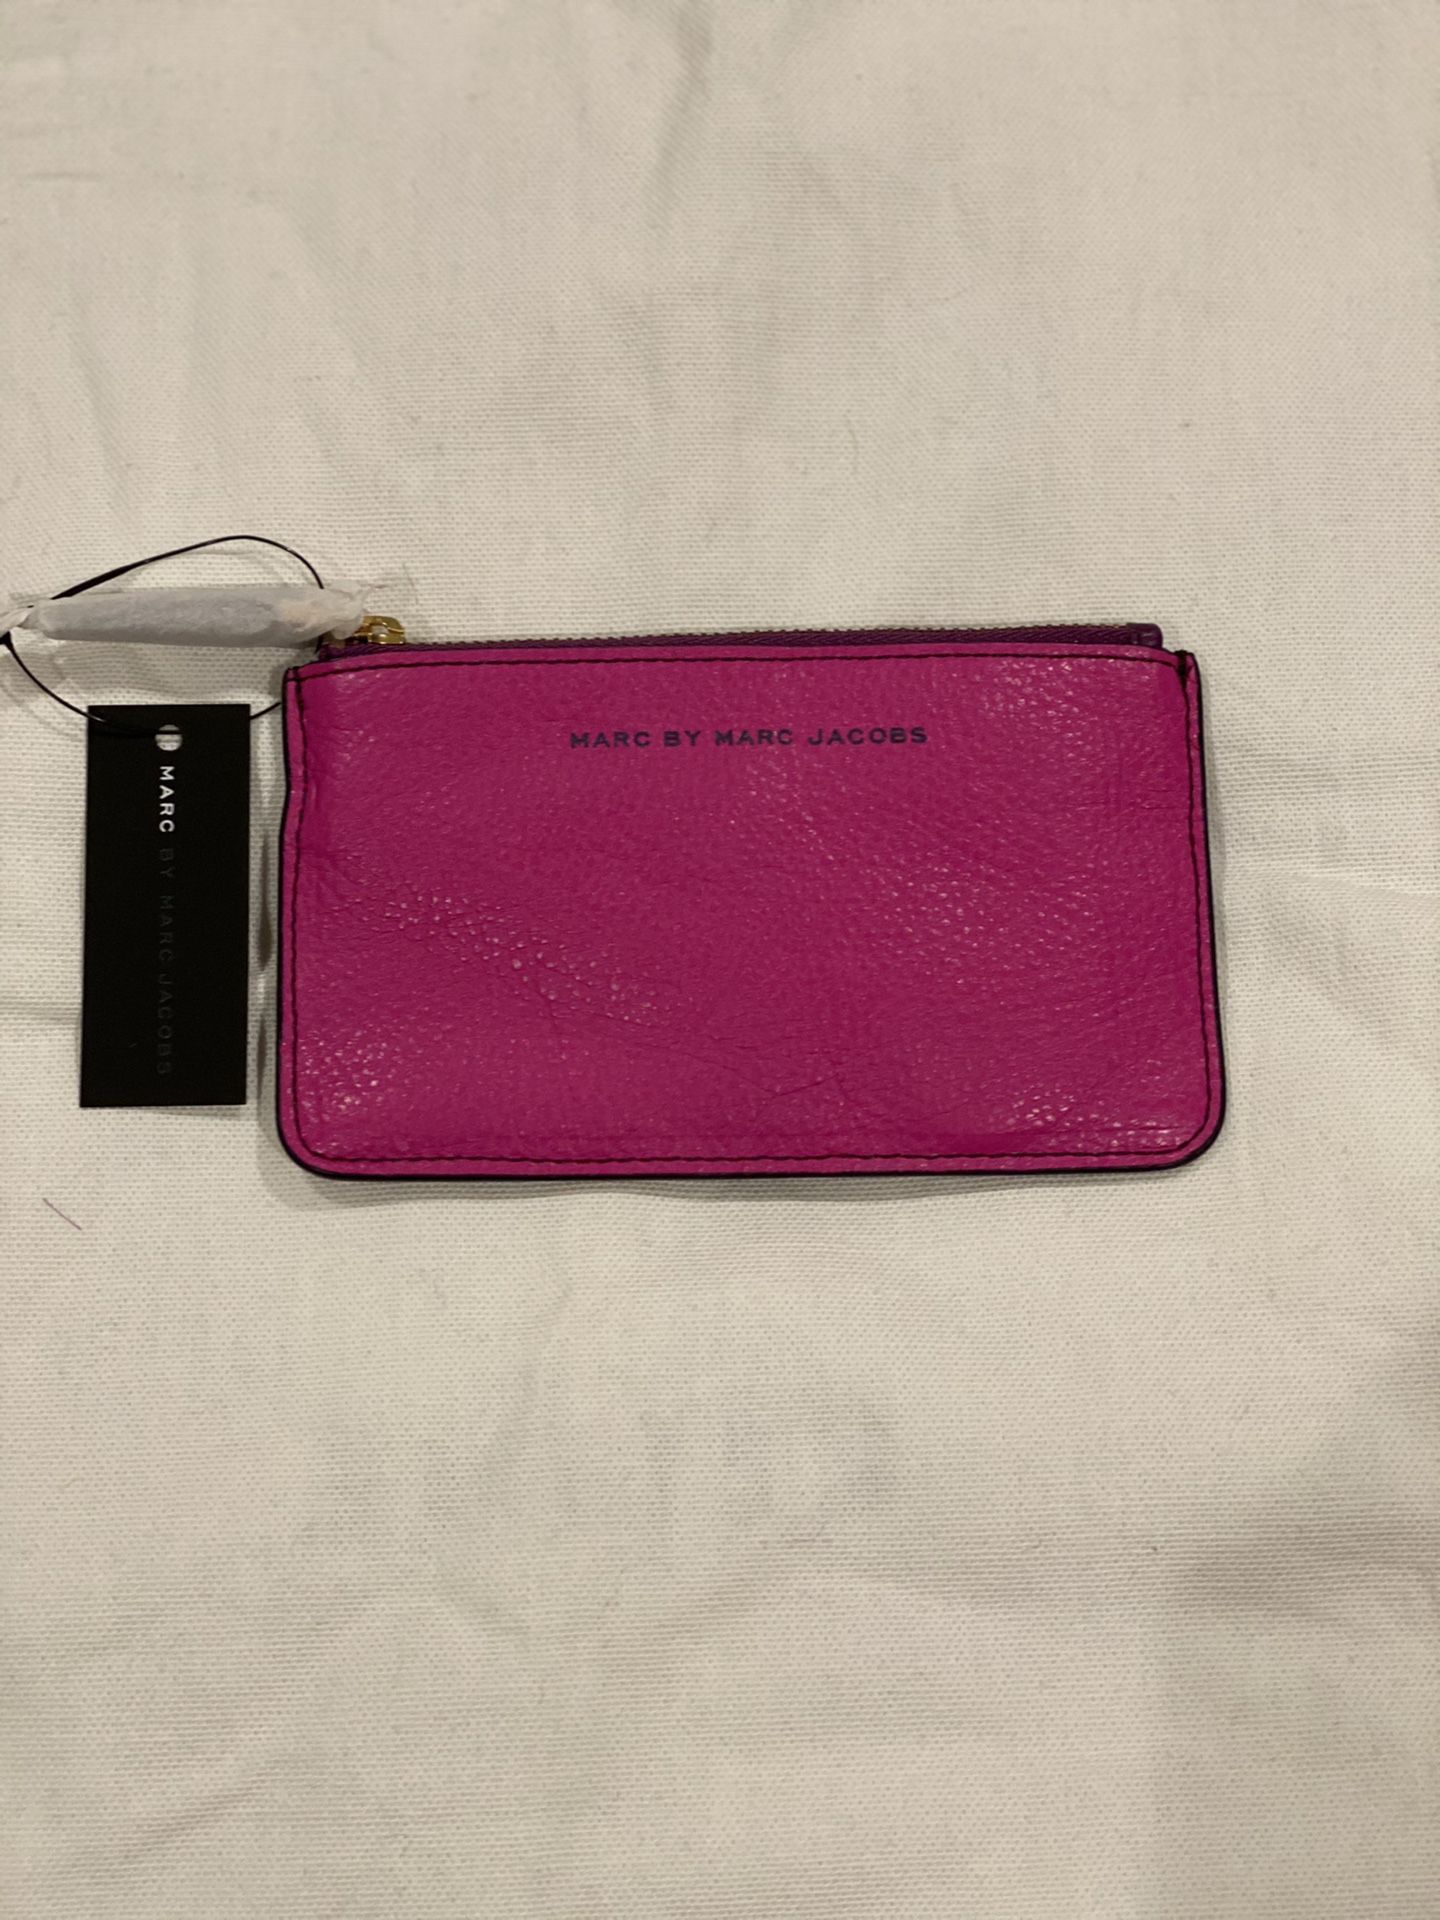 Marc by Marc Jacobs Pouch/Wallet